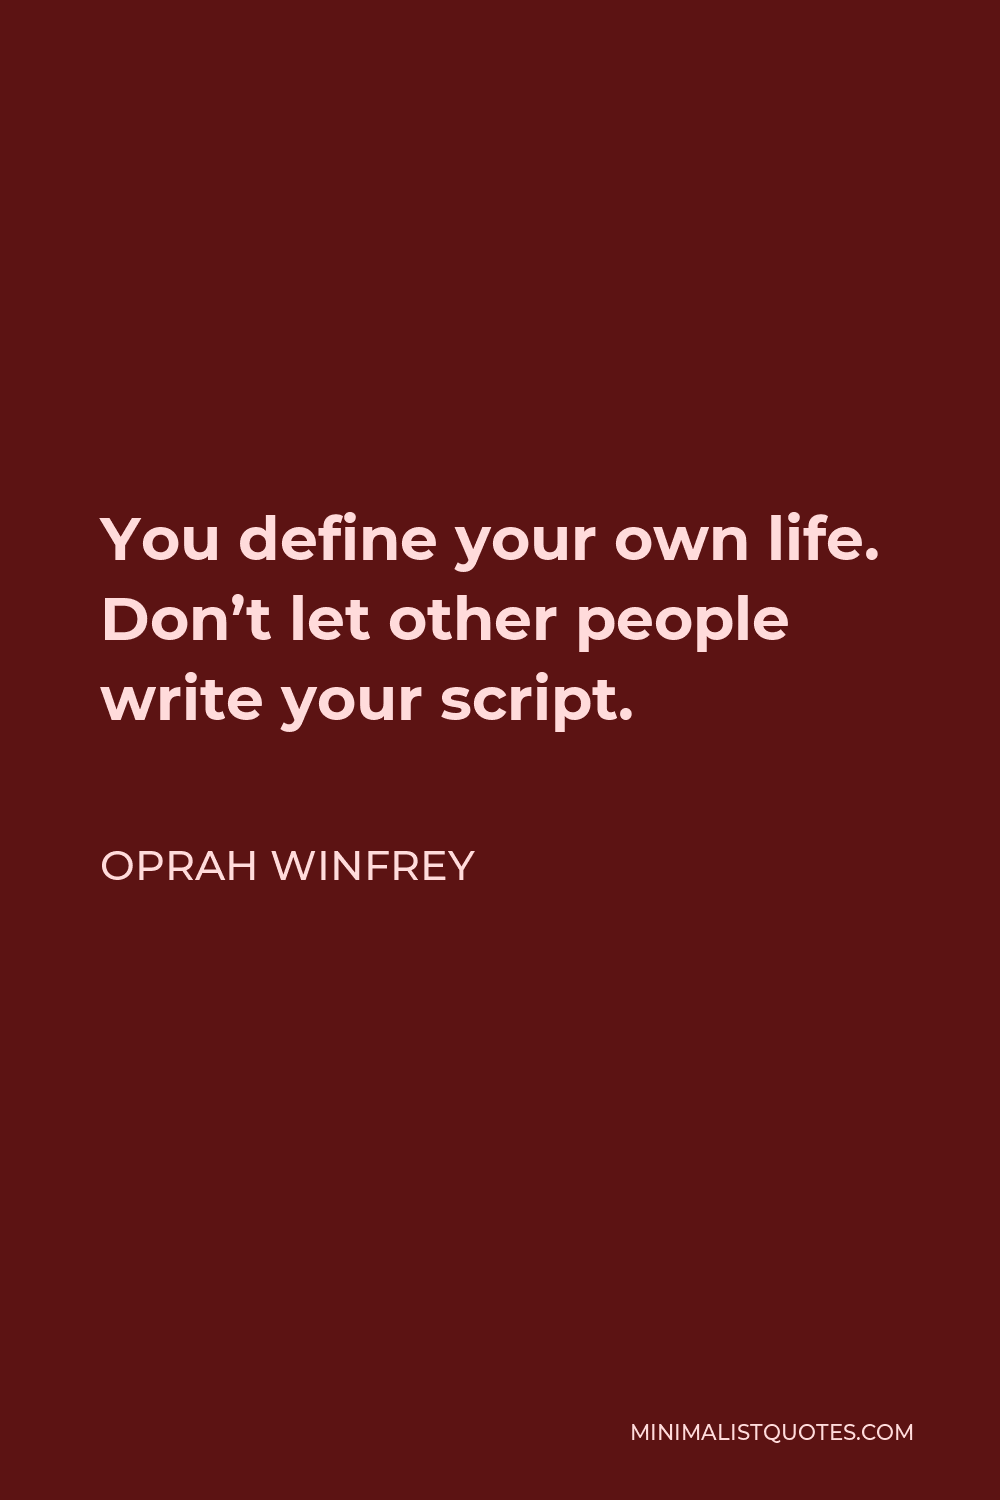 Oprah Winfrey Quote - You define your own life. Don’t let other people write your script.